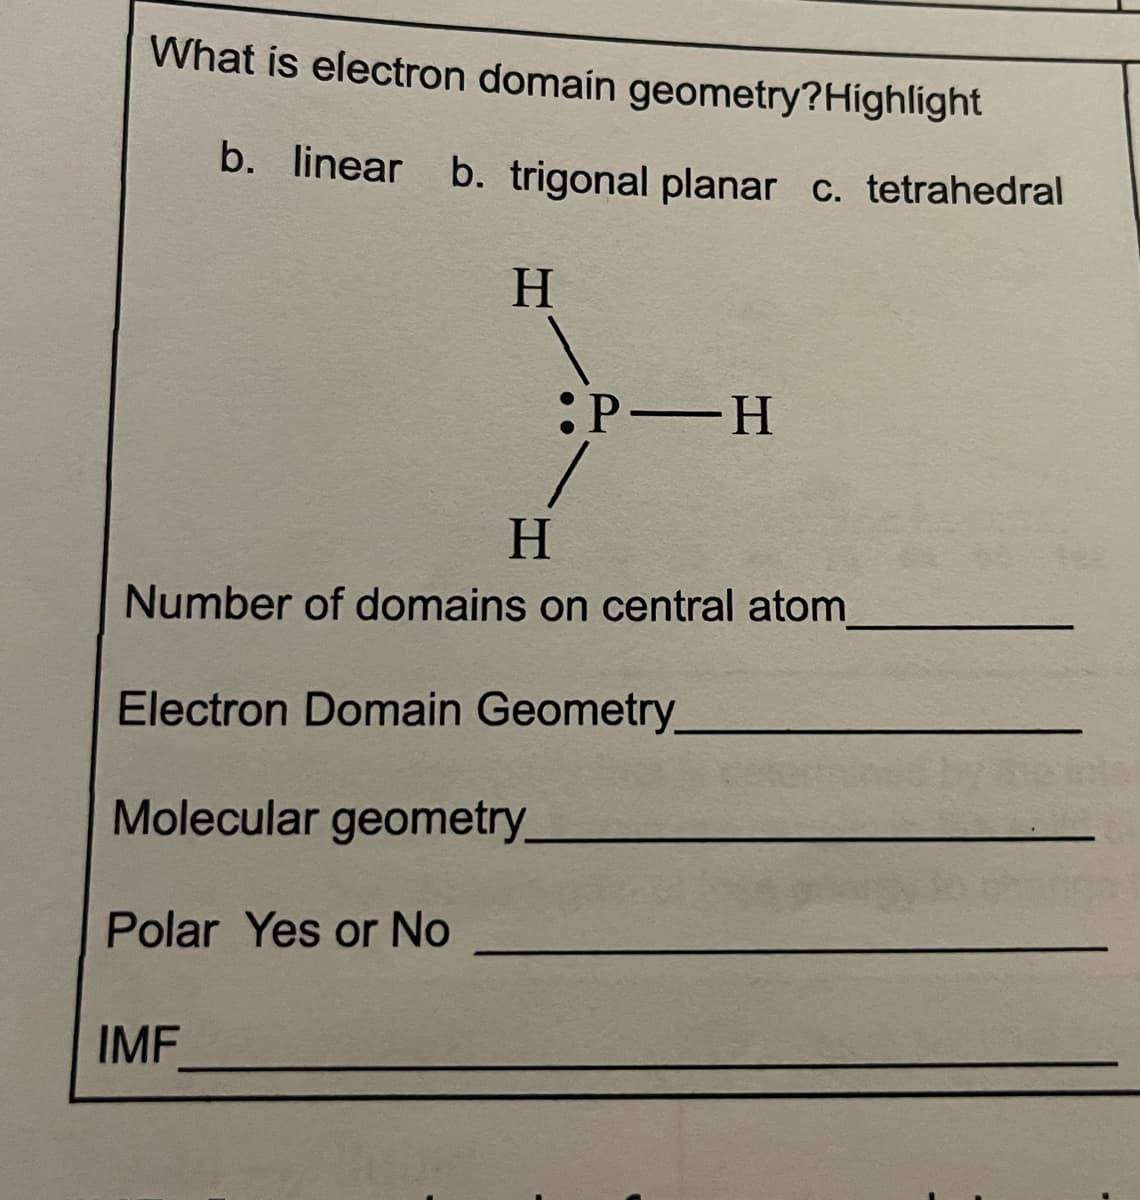 What is electron domaín geometry?Highlight
b. linear b. trigonal planar c. tetrahedral
H
:P H
H.
Number of domains on central atom_
Electron Domain Geometry
Molecular geometry_
Polar Yes or No
IMF
